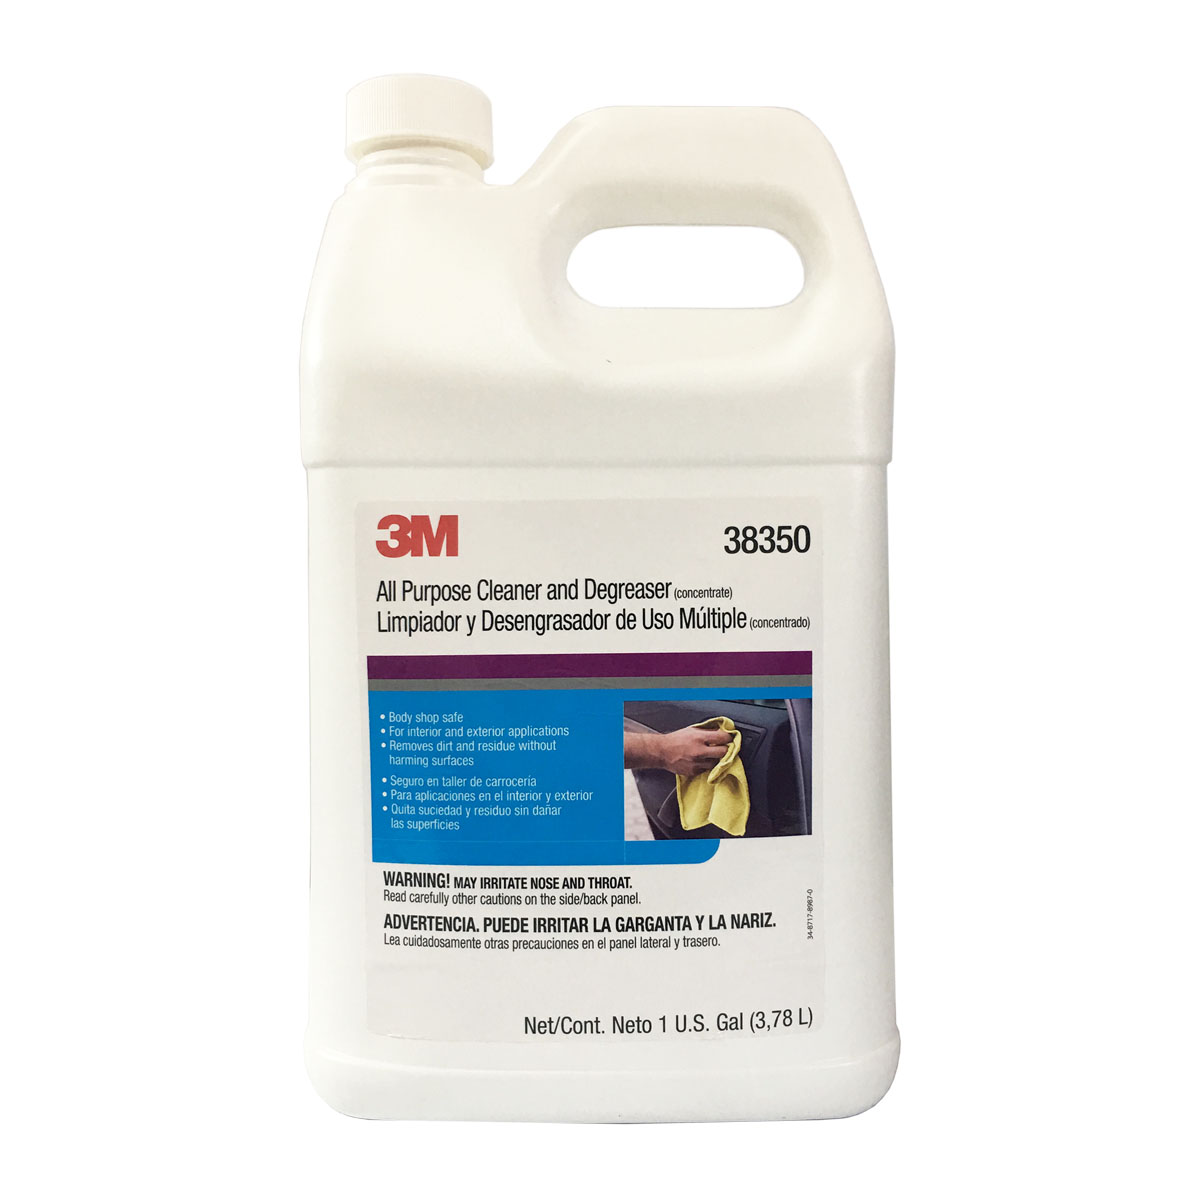 3M-38350-All-Purpose-Cleaner-and-Degreaser-1.jpg